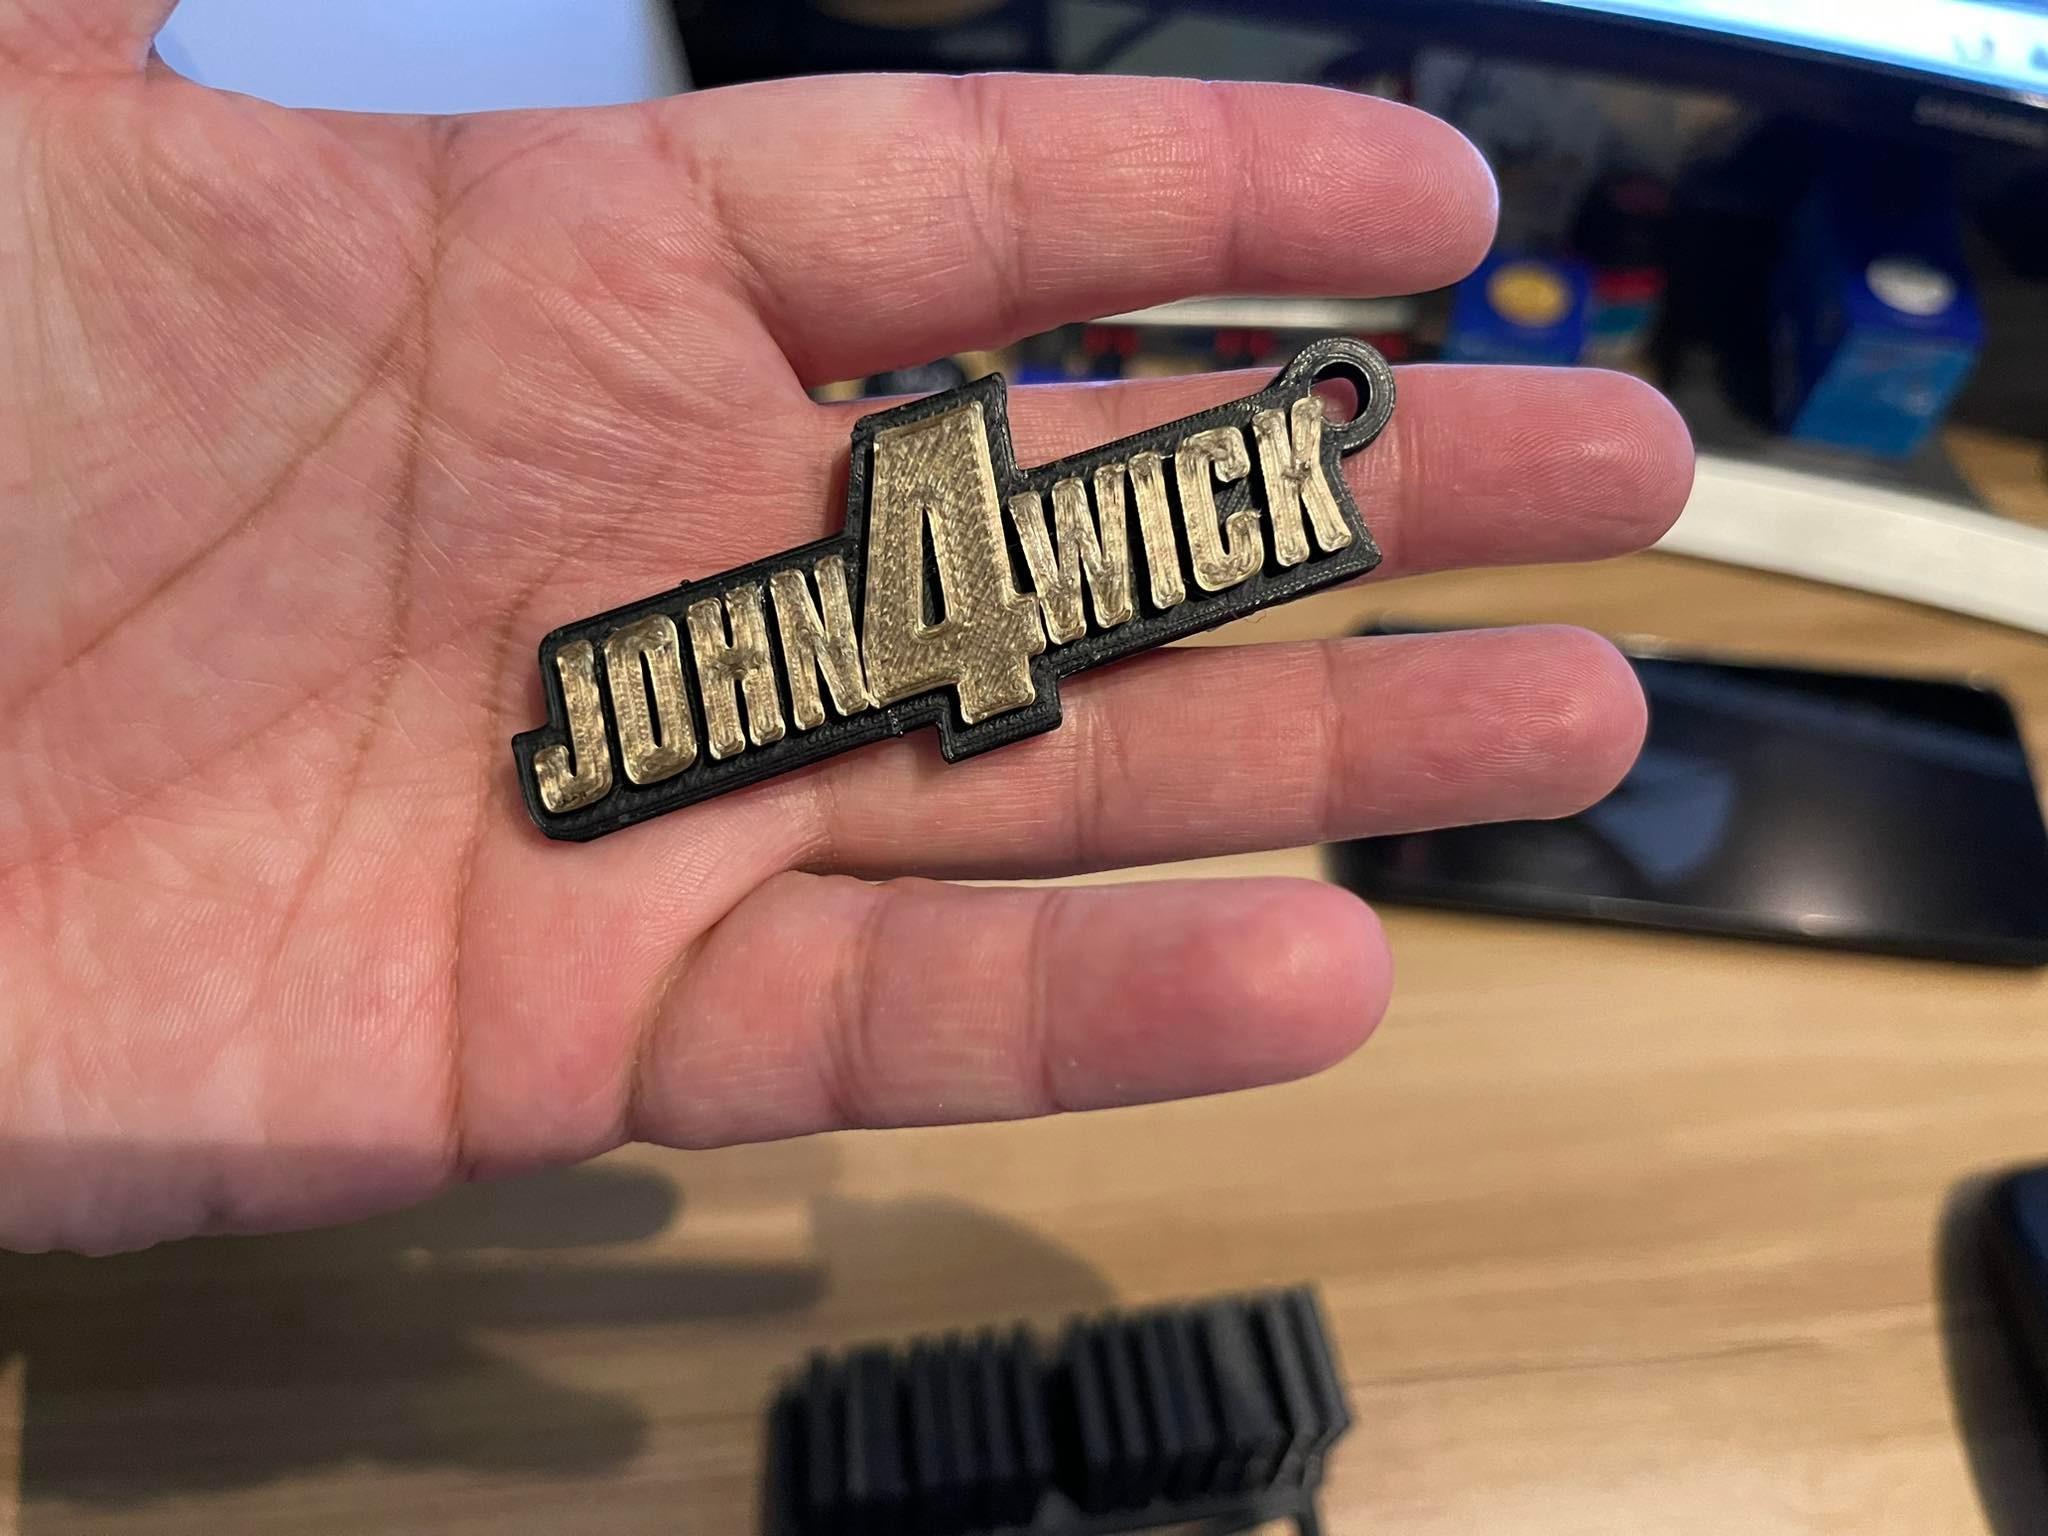 John wick 4 keychain and phone stand 3d model